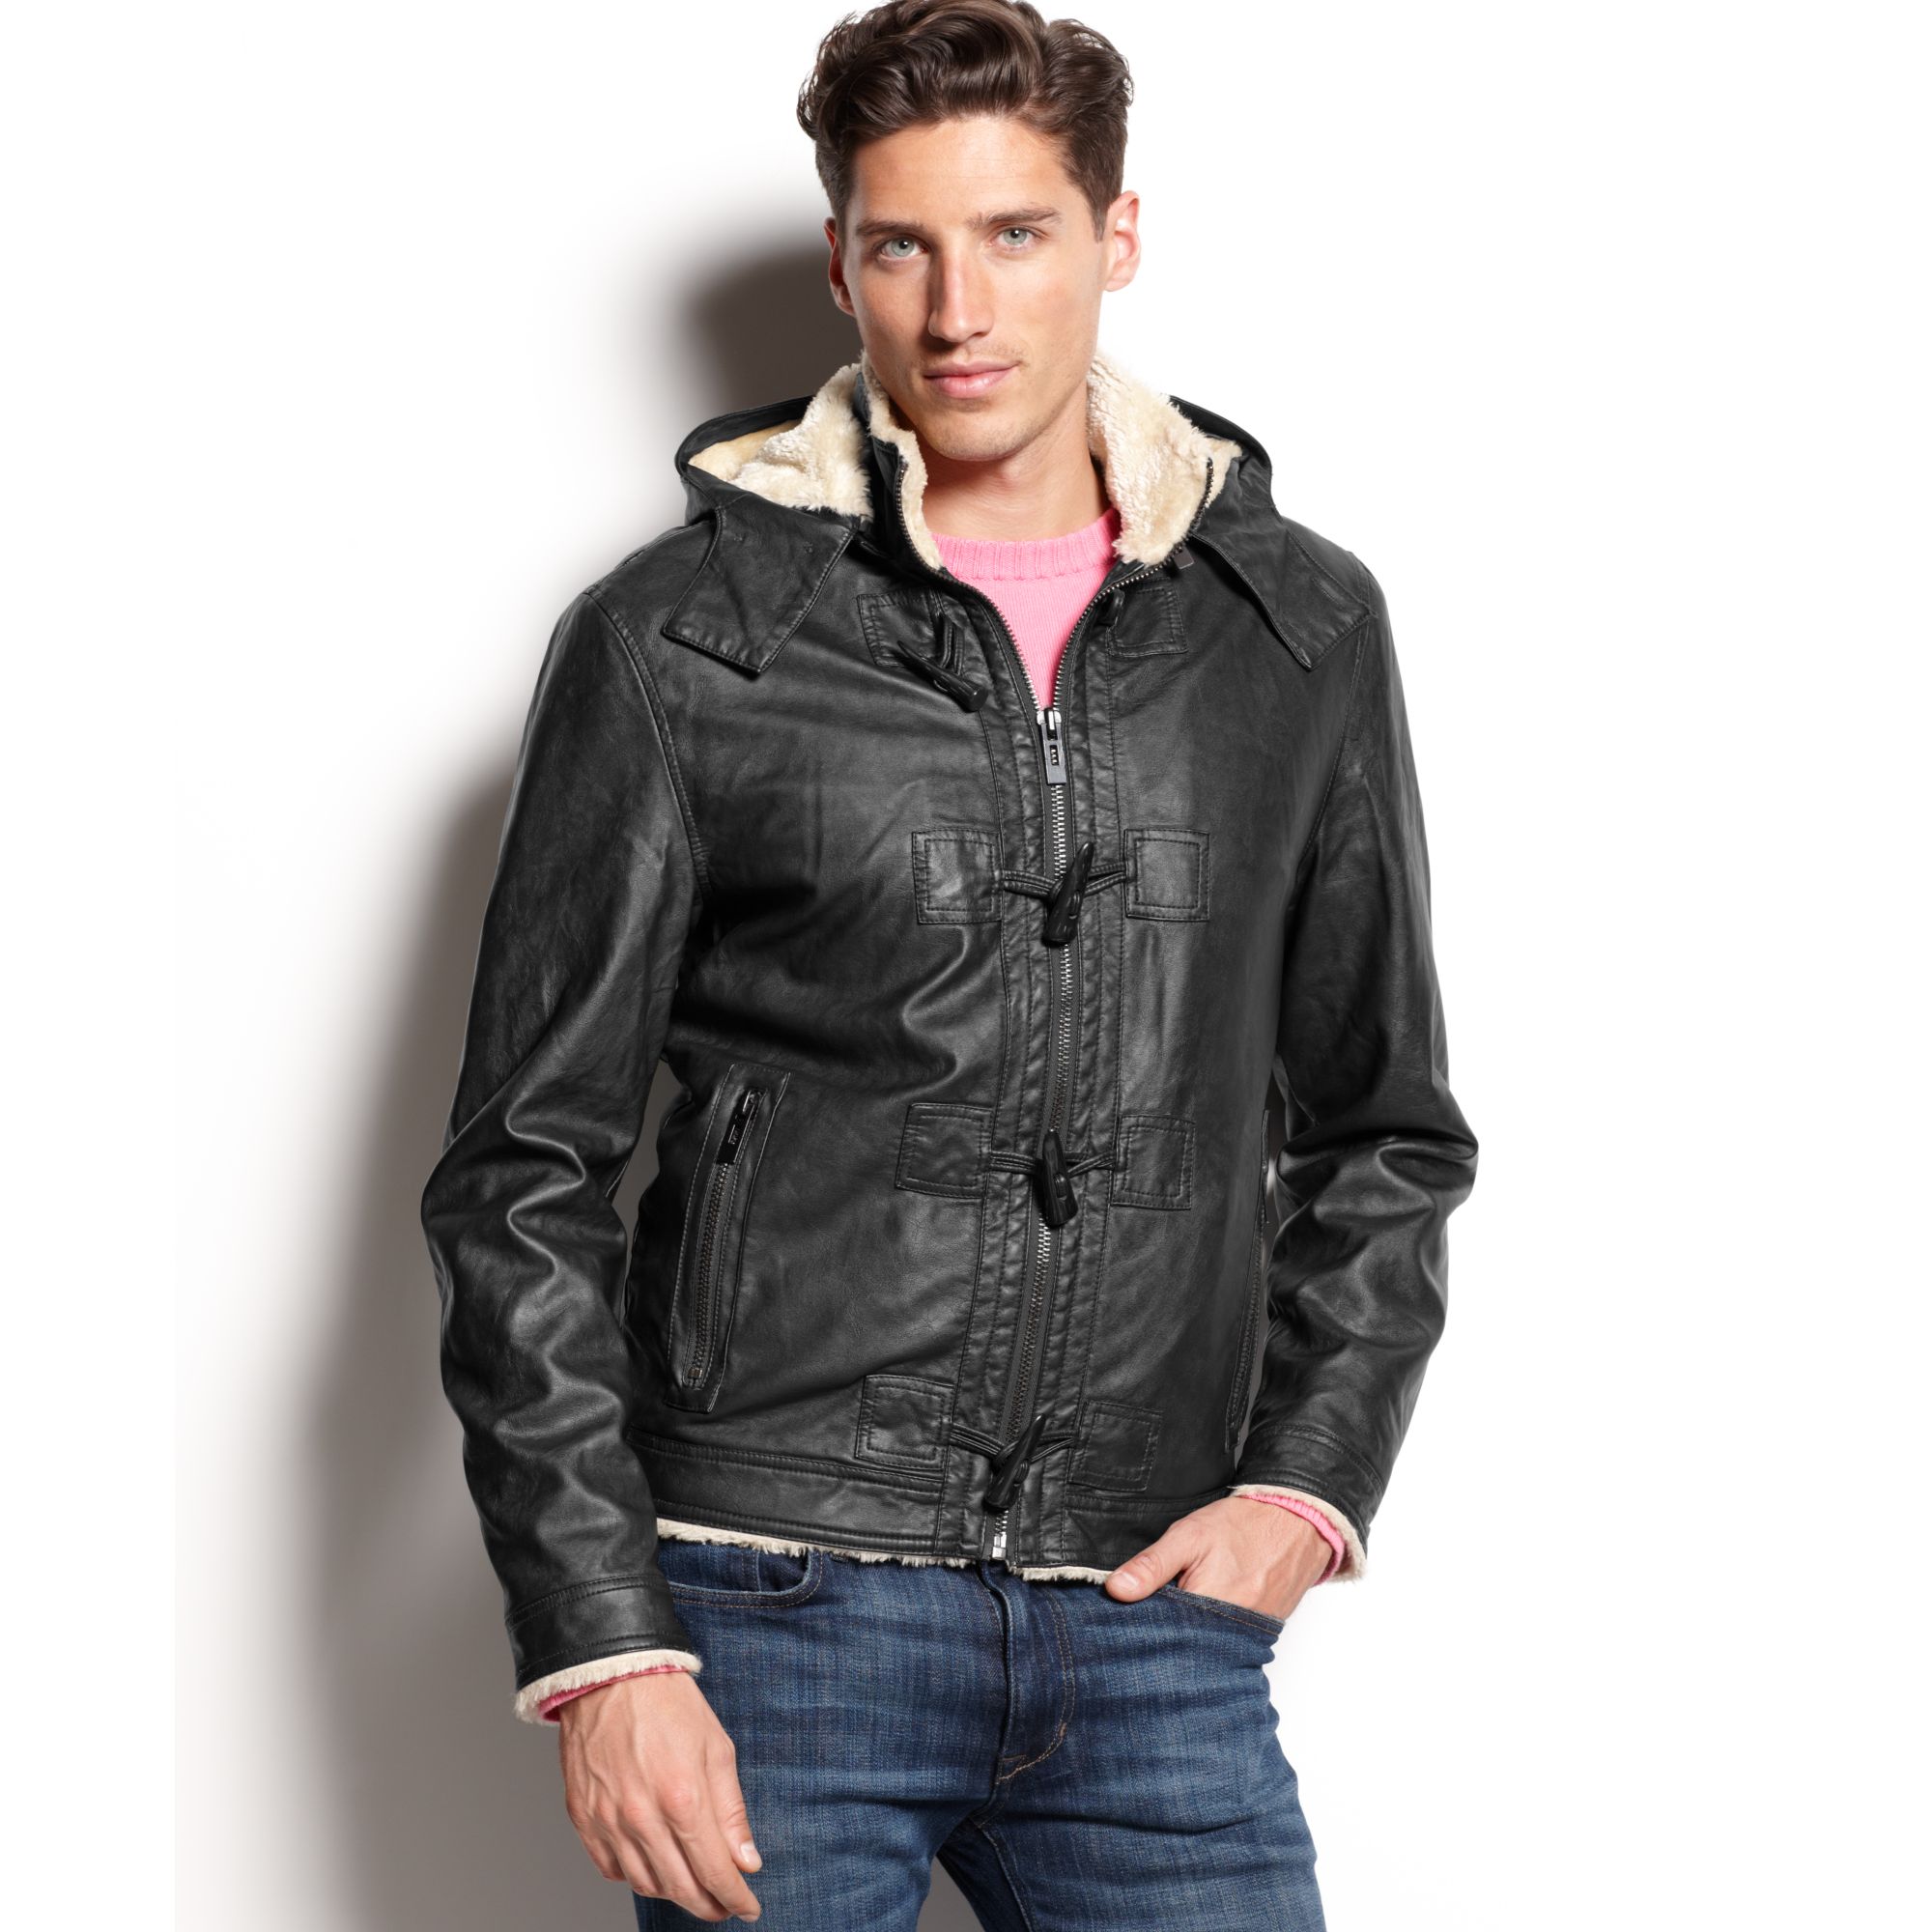 Lyst - Inc International Concepts Spad Sherpa Lined Jacket in Black for Men